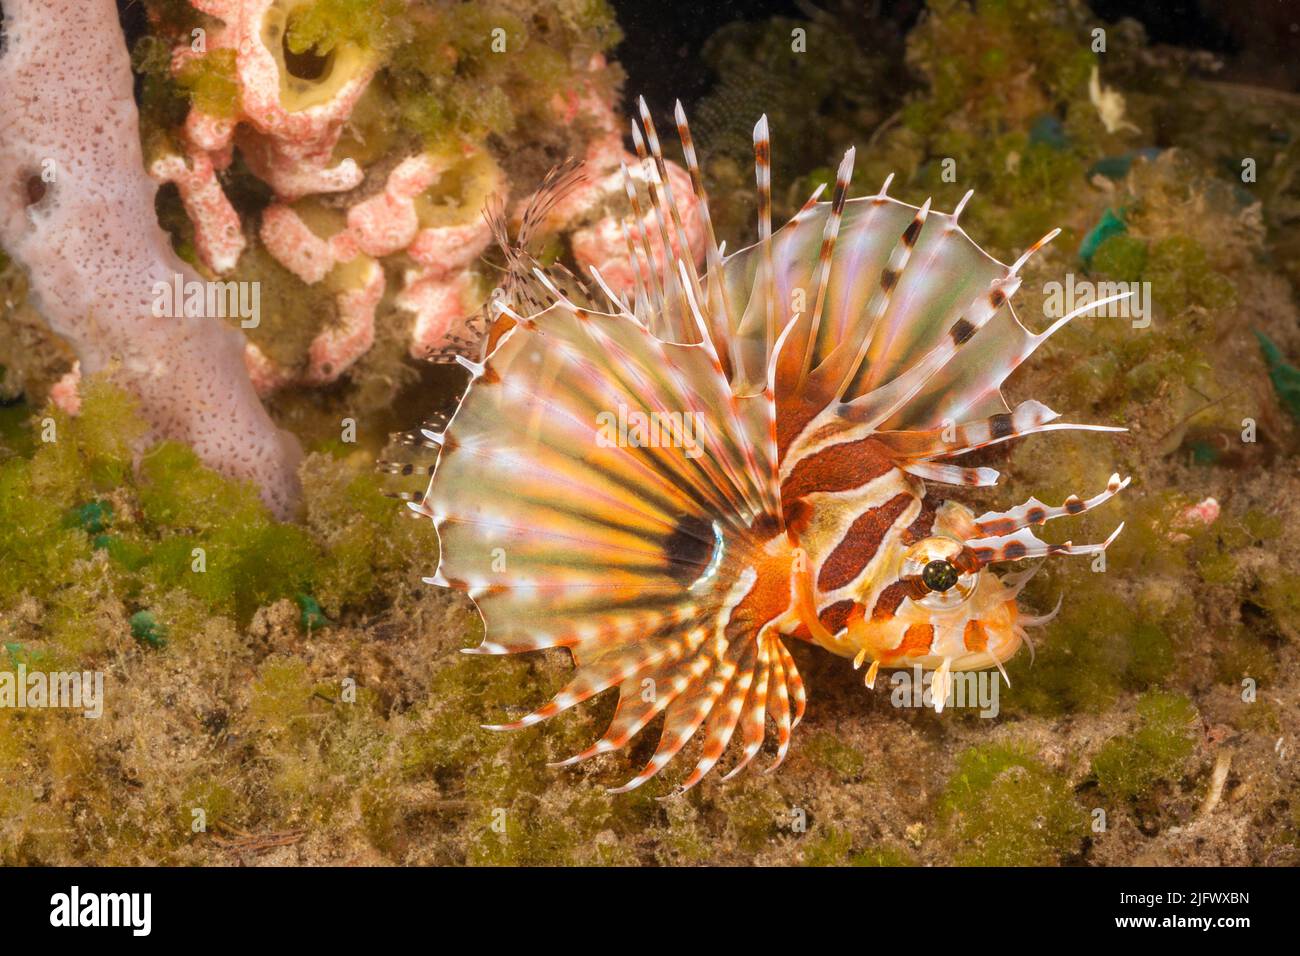 A close look at a zebra lionfish, Dendrochirus zebra, in the Philippines. Stock Photo